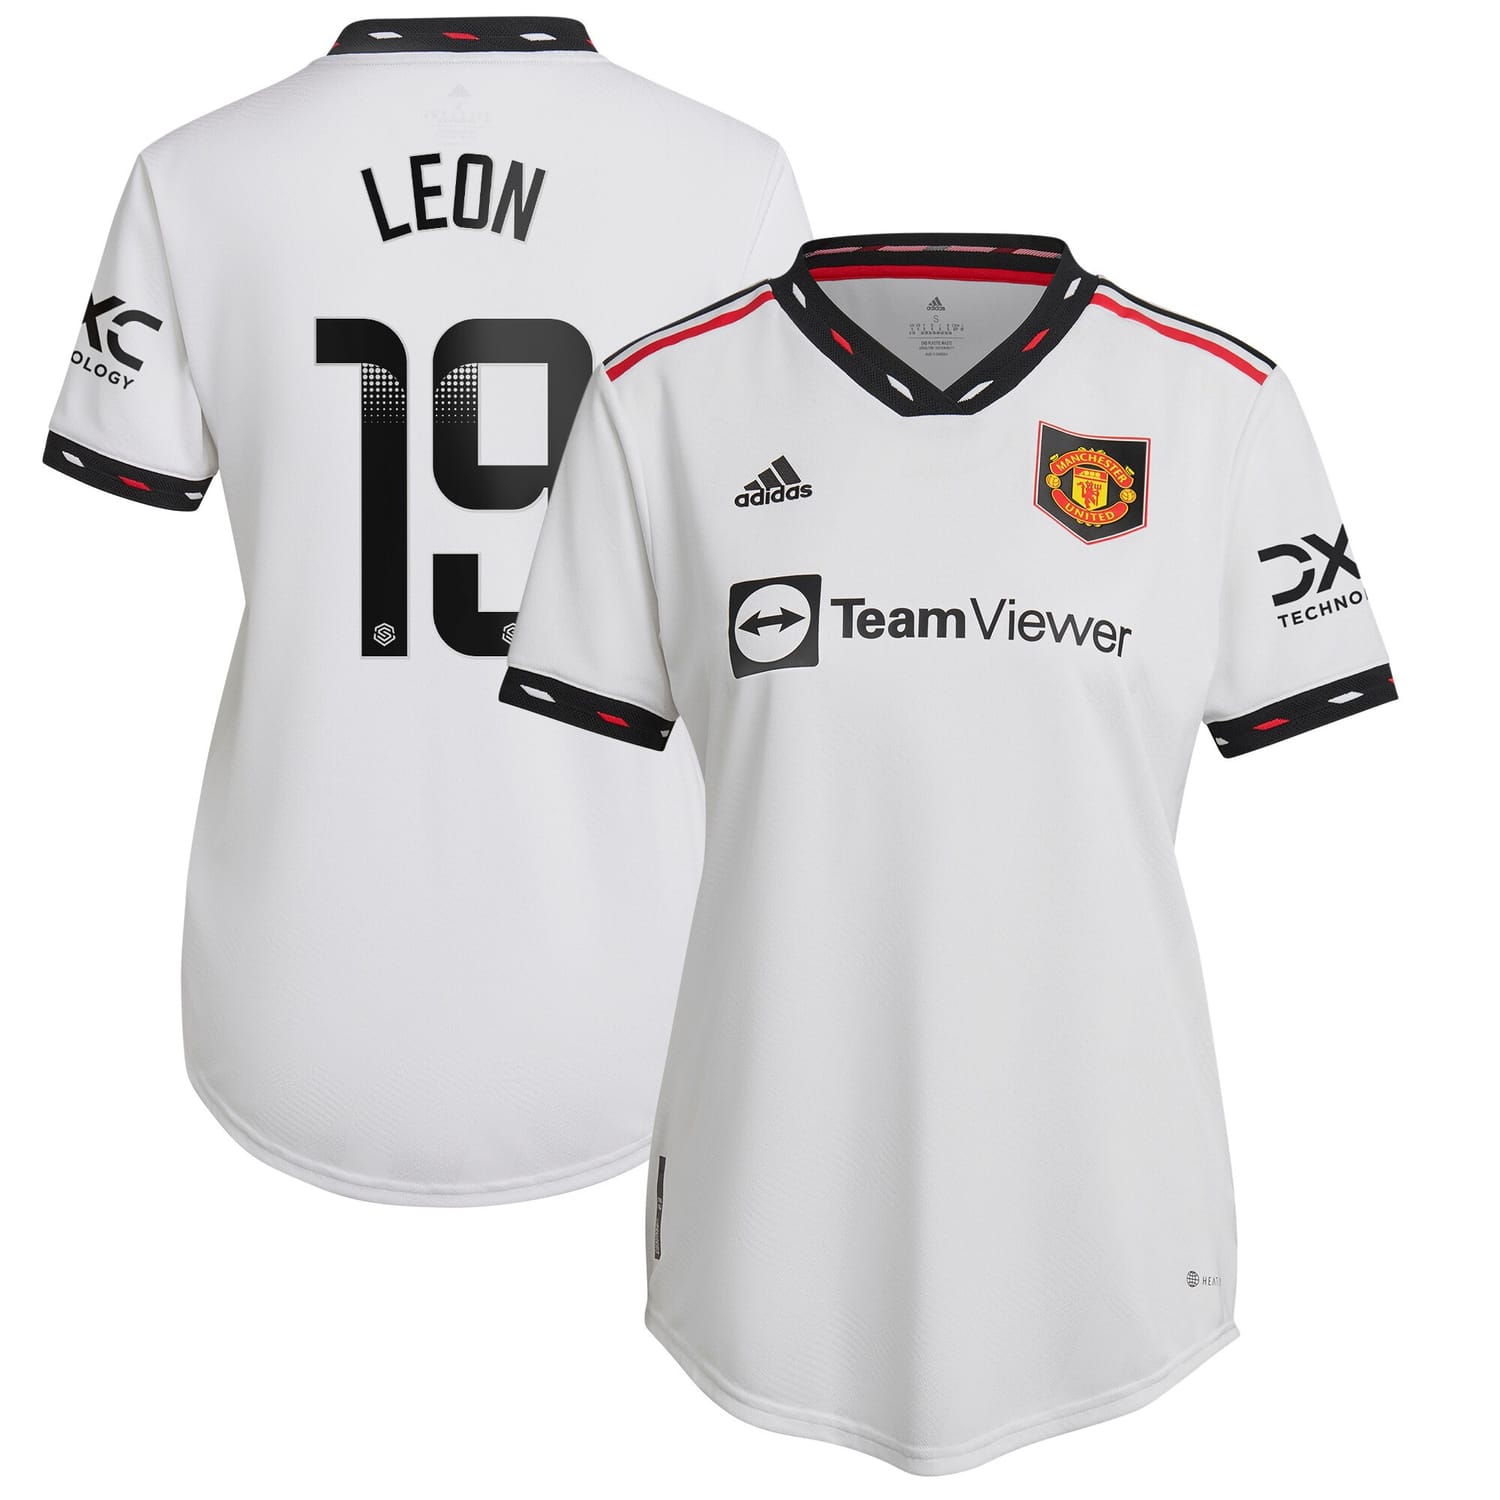 Premier League Manchester United Away WSL Authentic Jersey Shirt 2022-23 player Adriana Leon 19 printing for Women